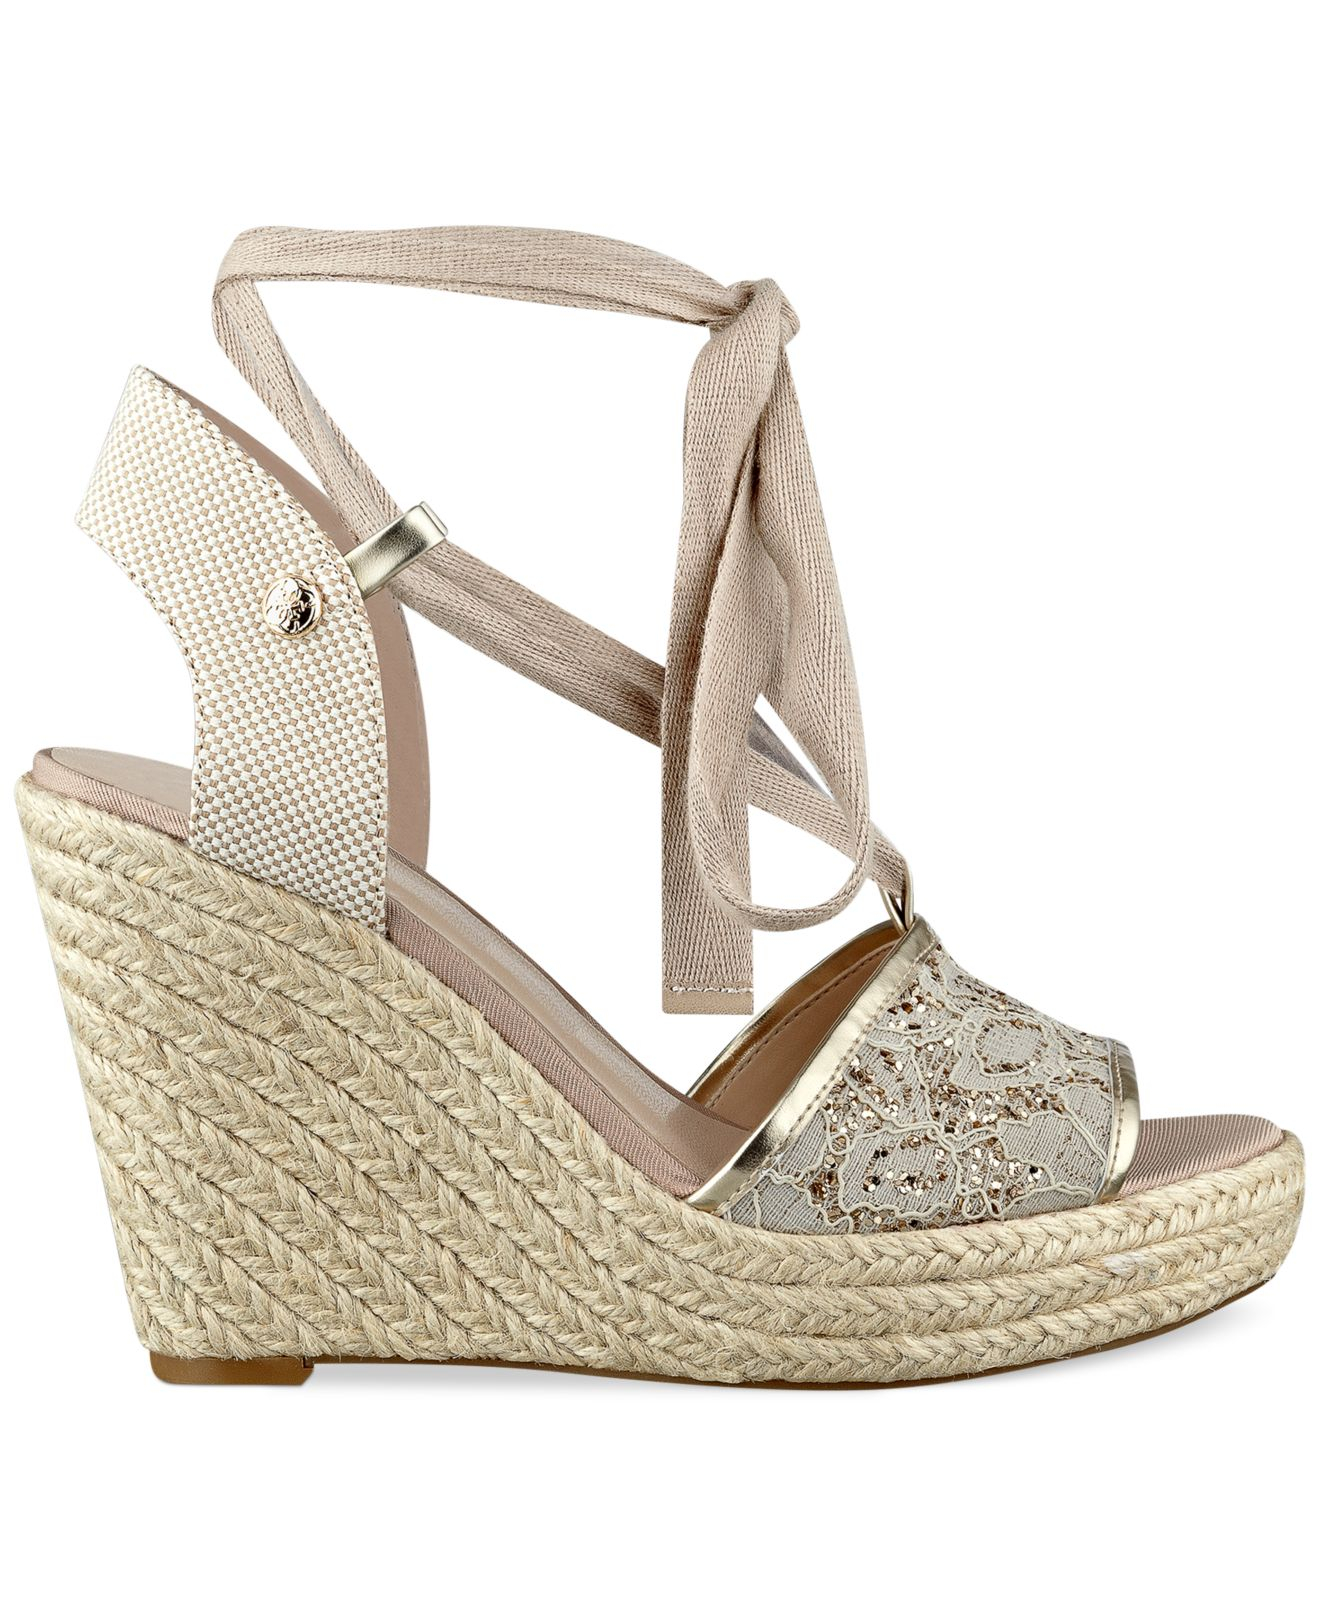 Lyst - Guess Eylyna2 Ankle Wrap Espadrille Platform Wedge Sandals in ...